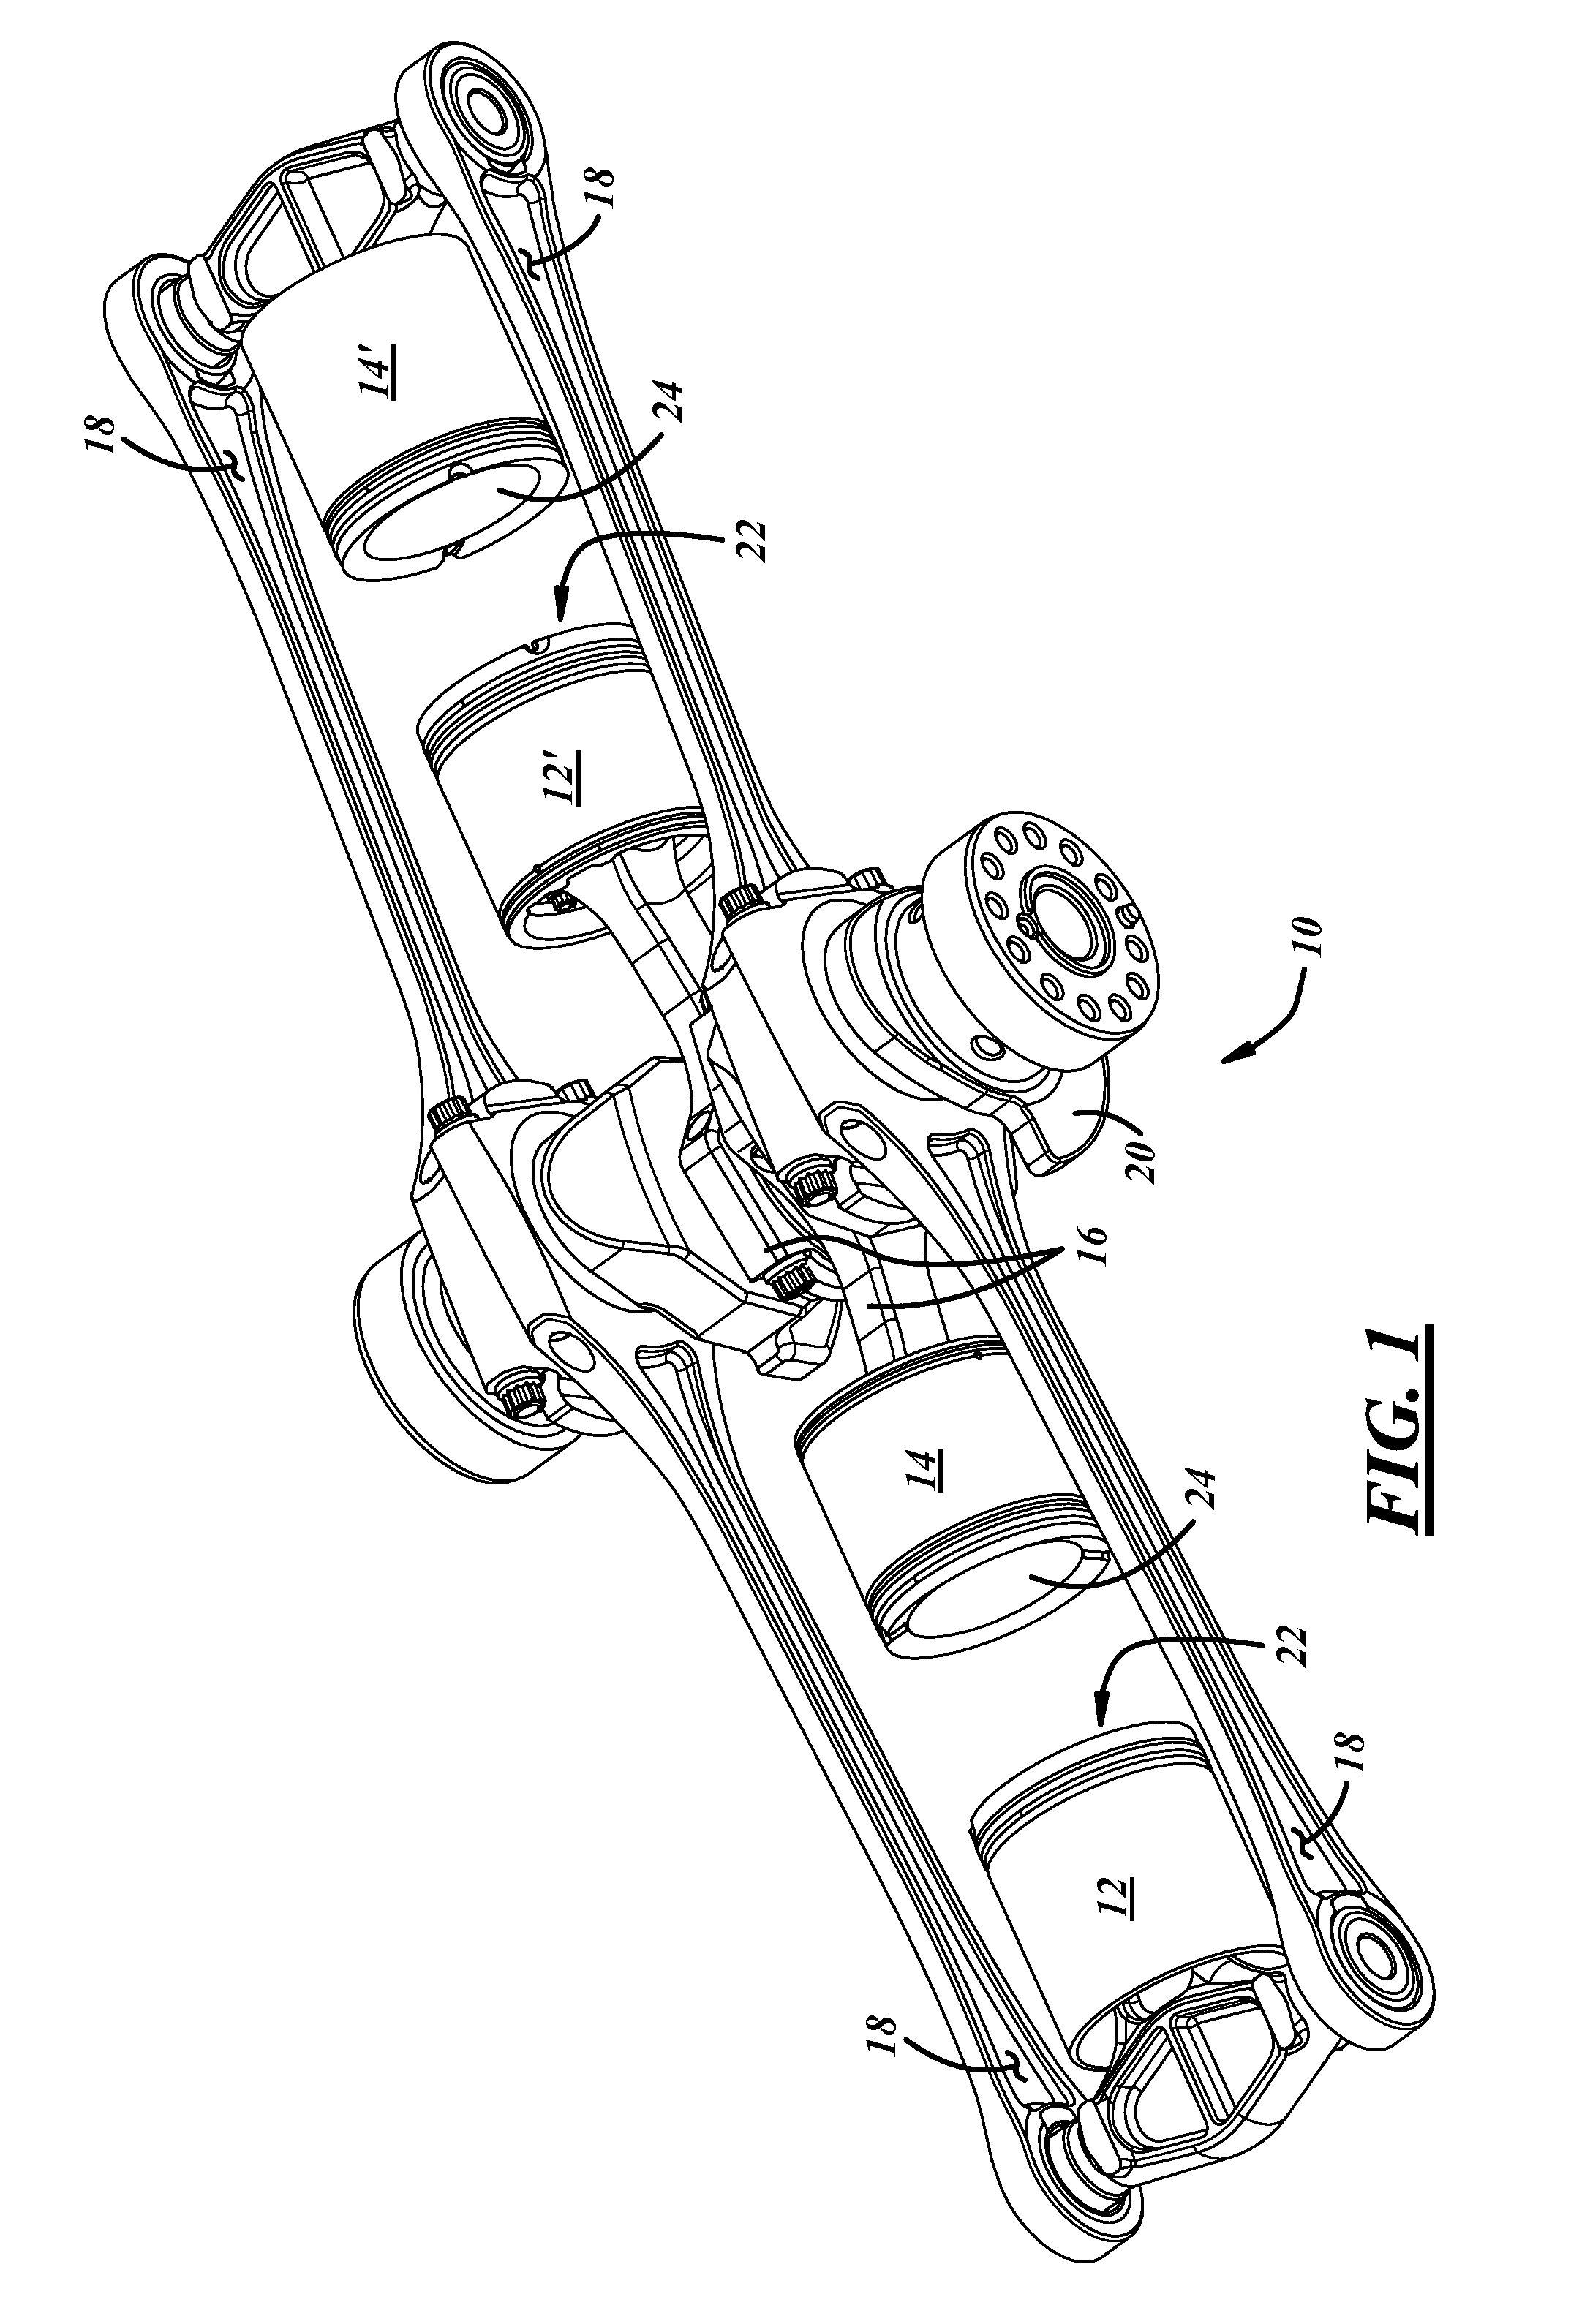 High-Squish Combustion Chamber With Side Injection